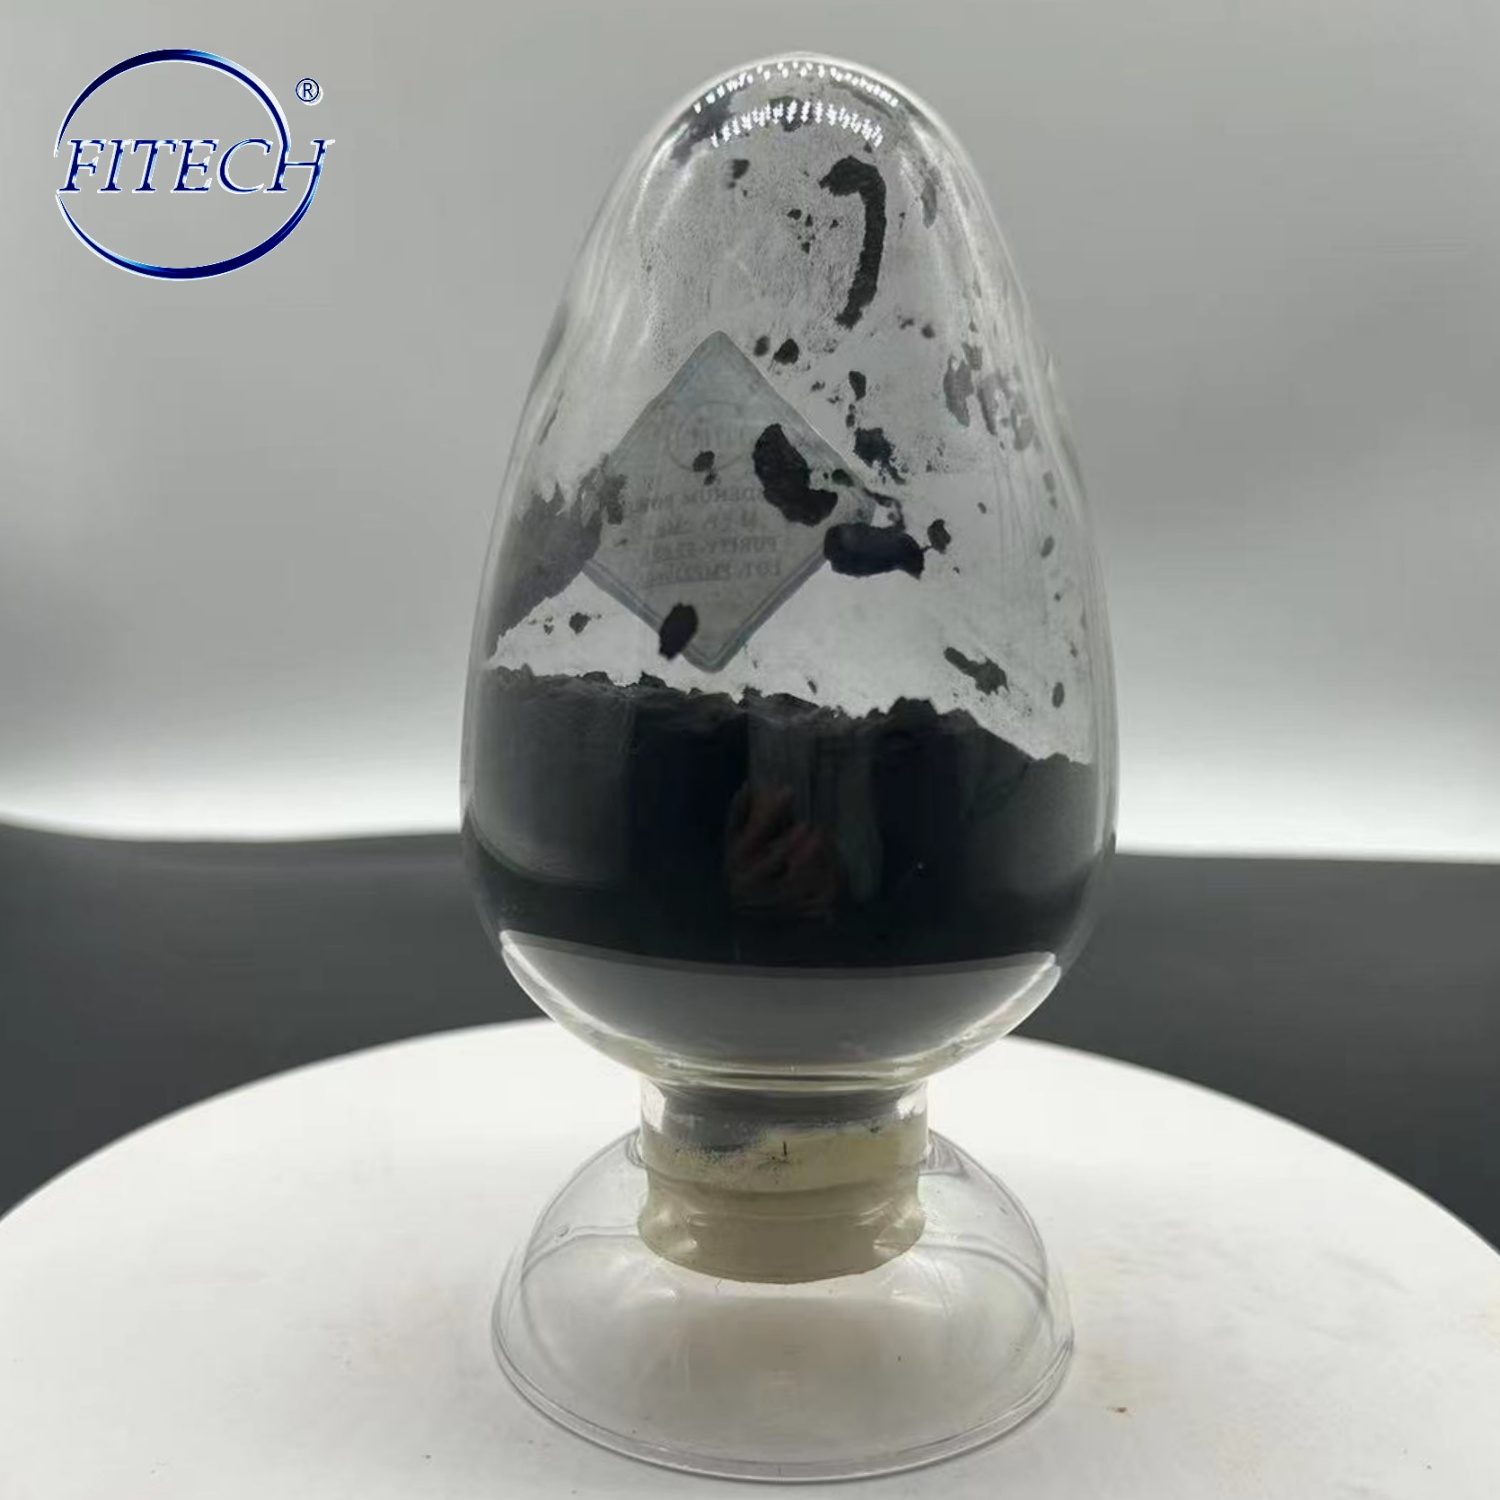 Magnesium Nanoparticles, High purity 99.9% at best Price